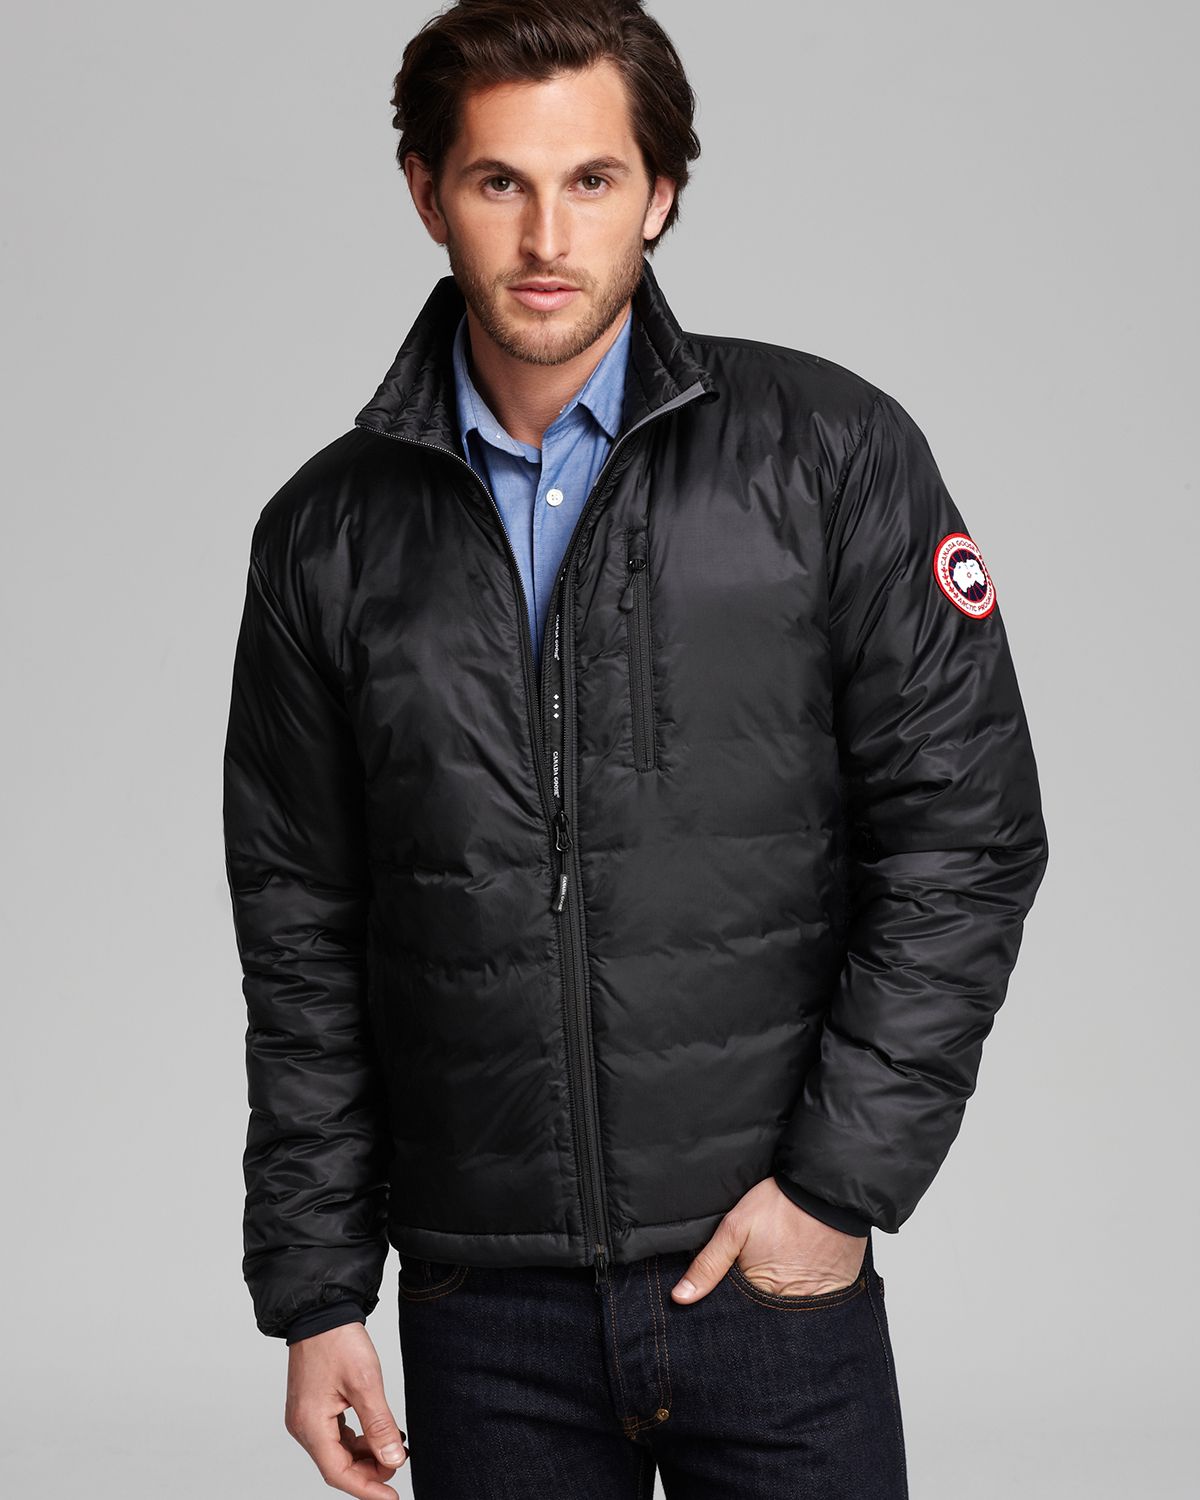 Canada Goose parka online discounts - Canada goose Lodge Down Jacket in Black for Men | Lyst